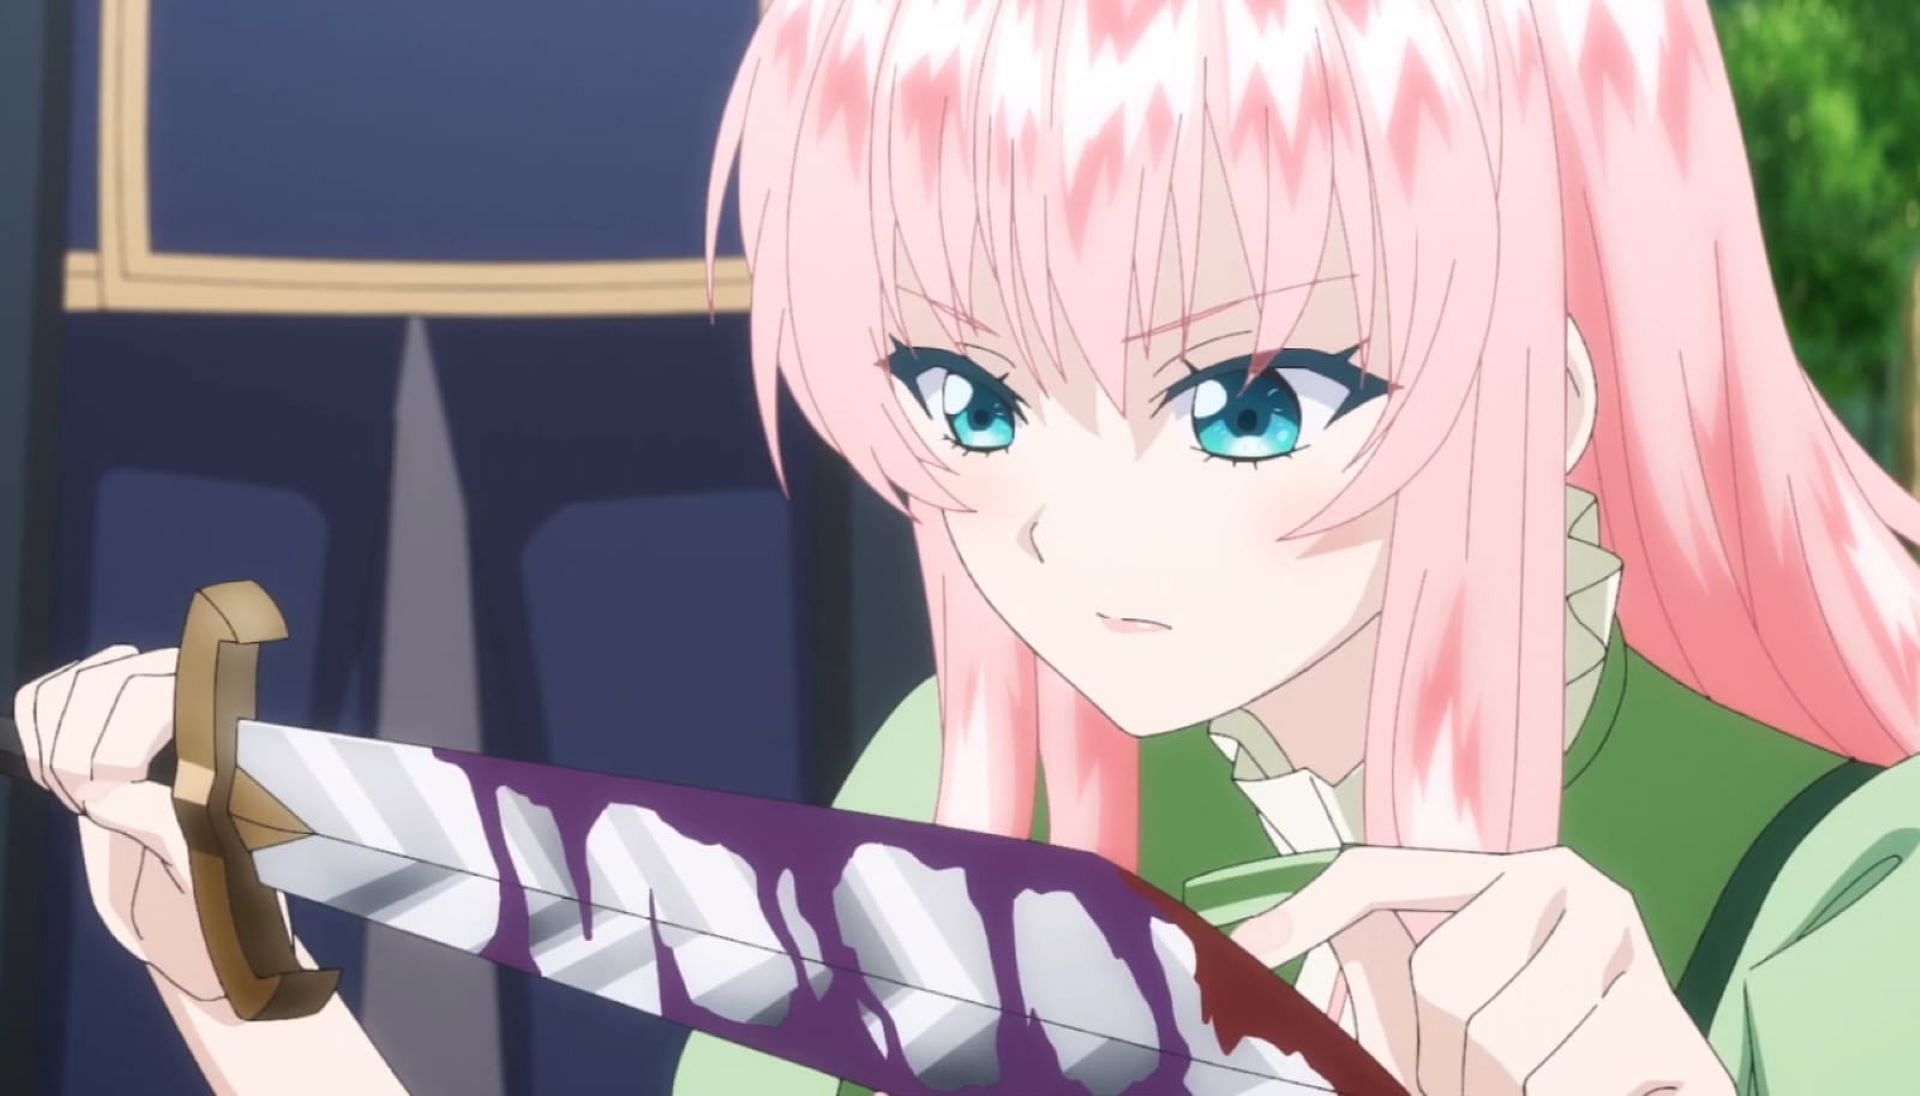 Rishe checking a blade in the anime (Image via Studio KAI and Hornets)